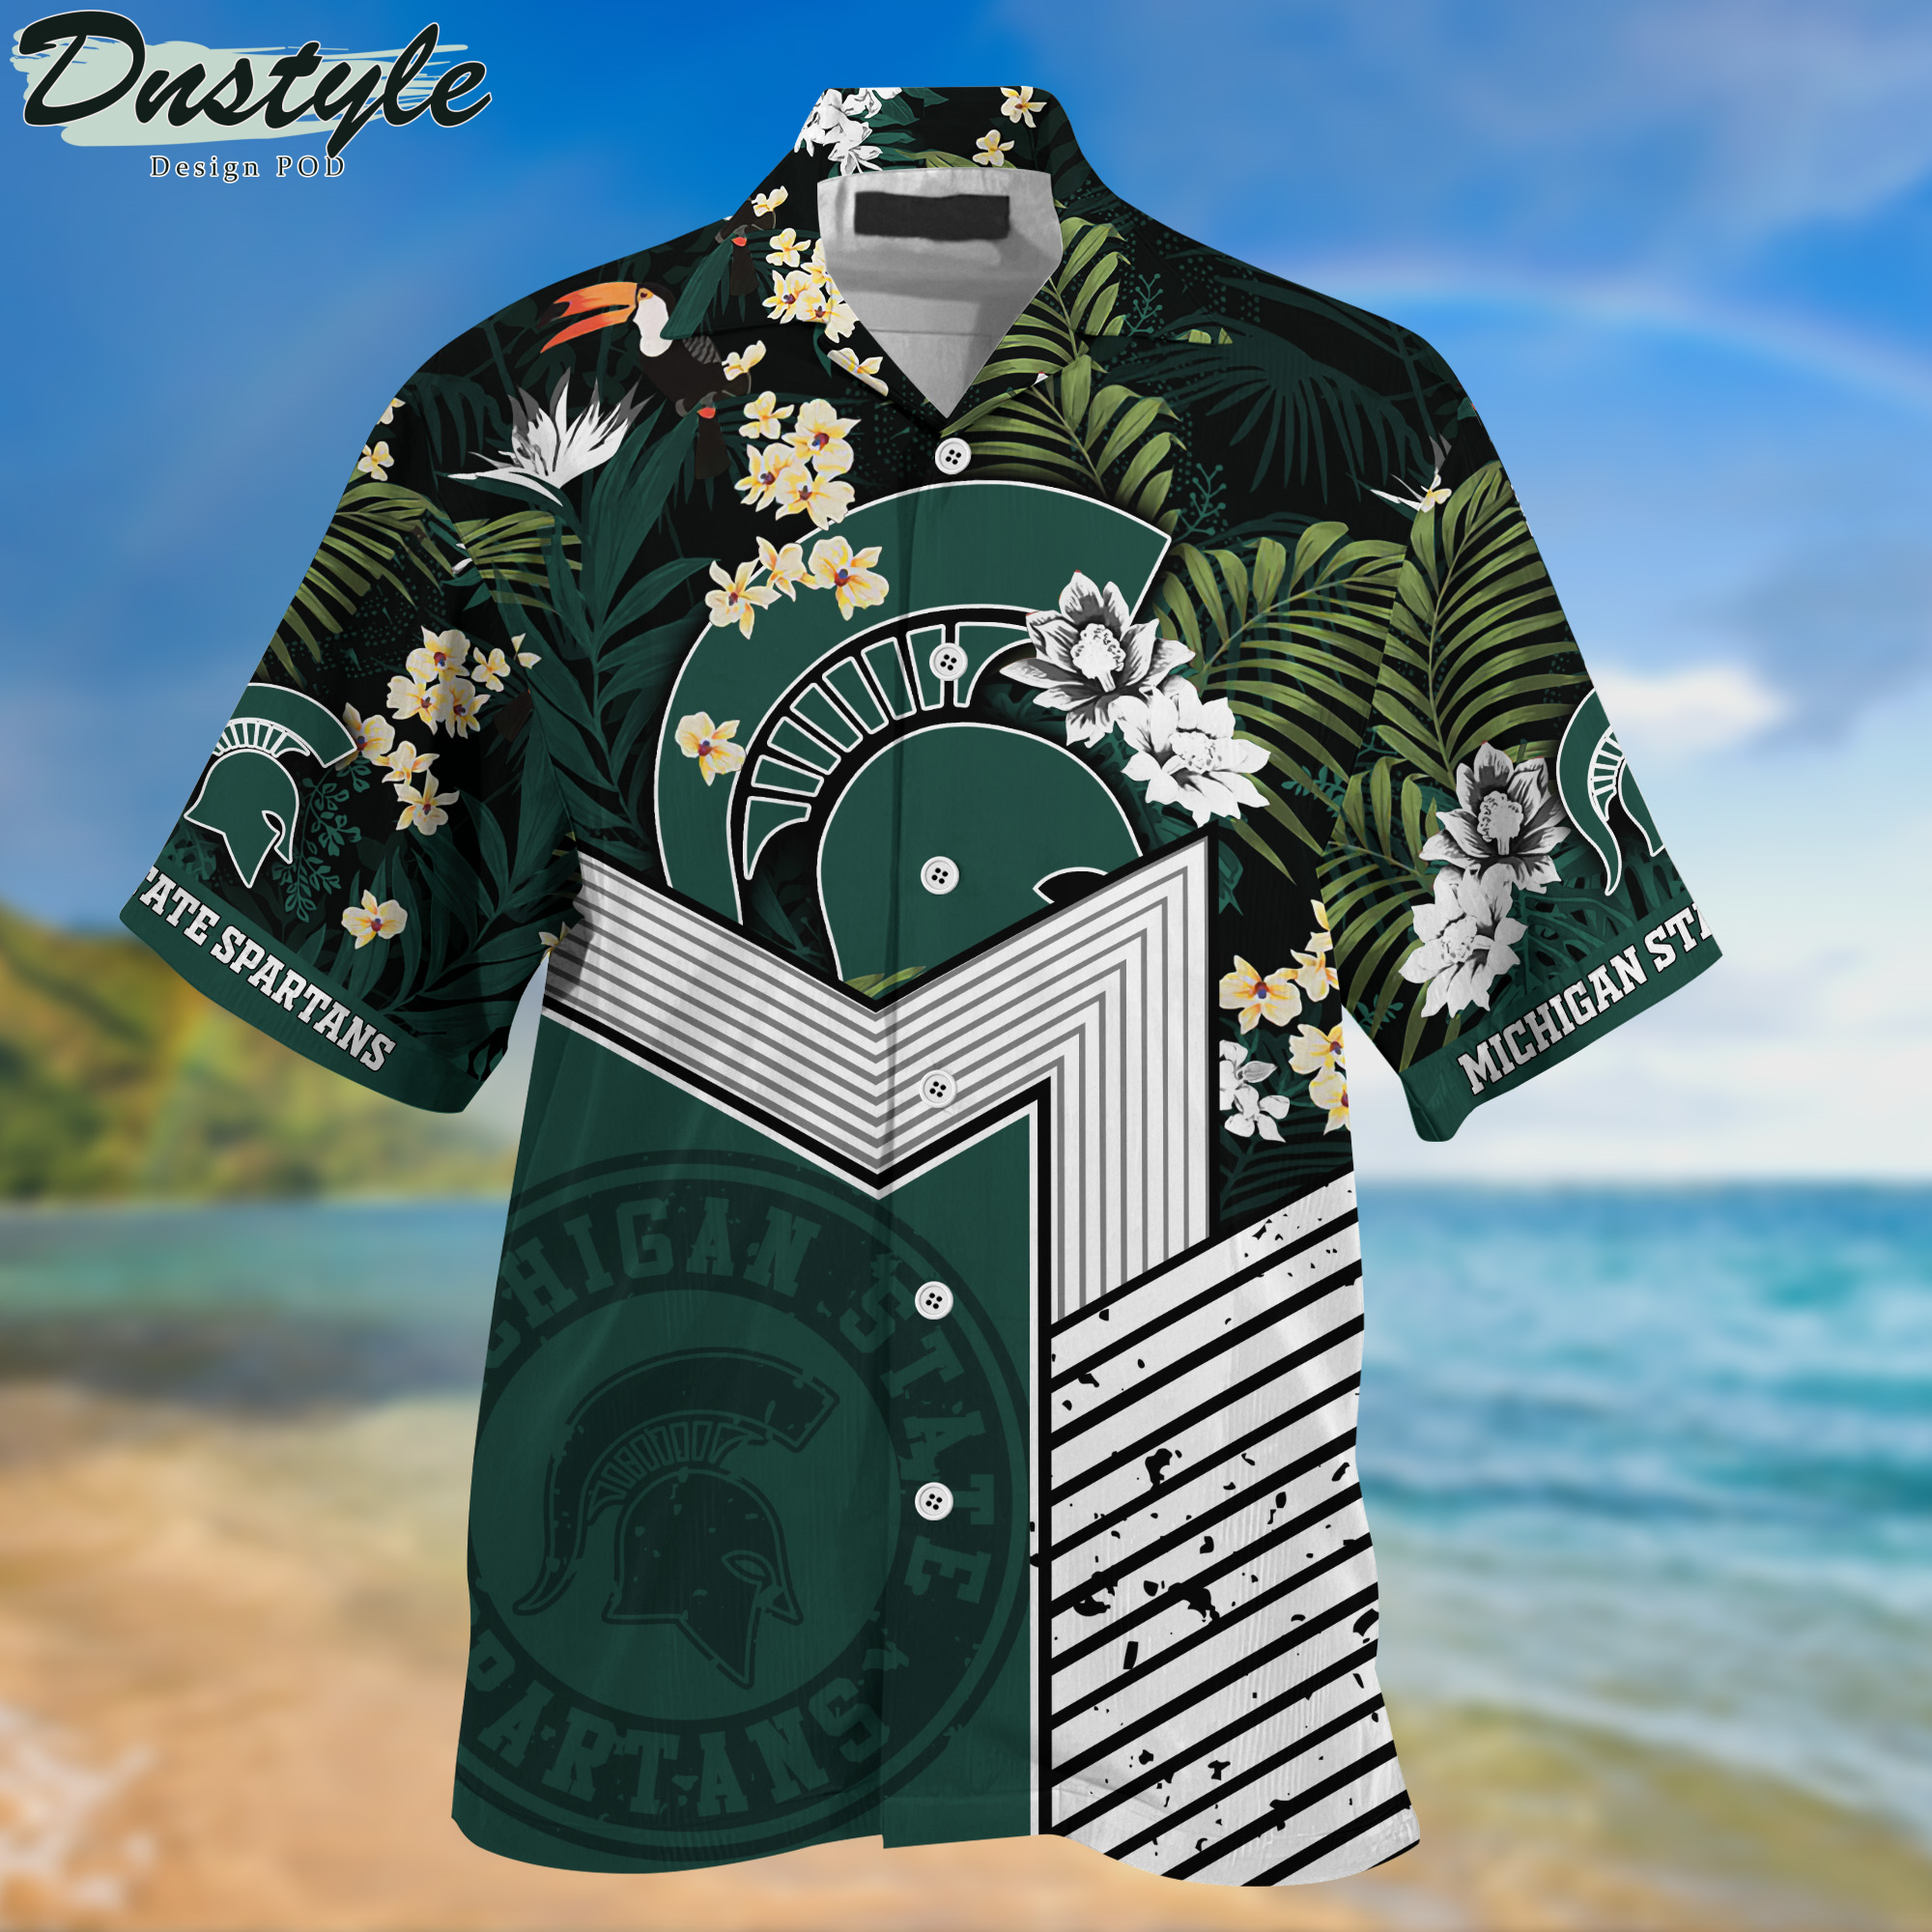 Michigan State Spartans Tropical New Collection Hawaii Shirt And Shorts